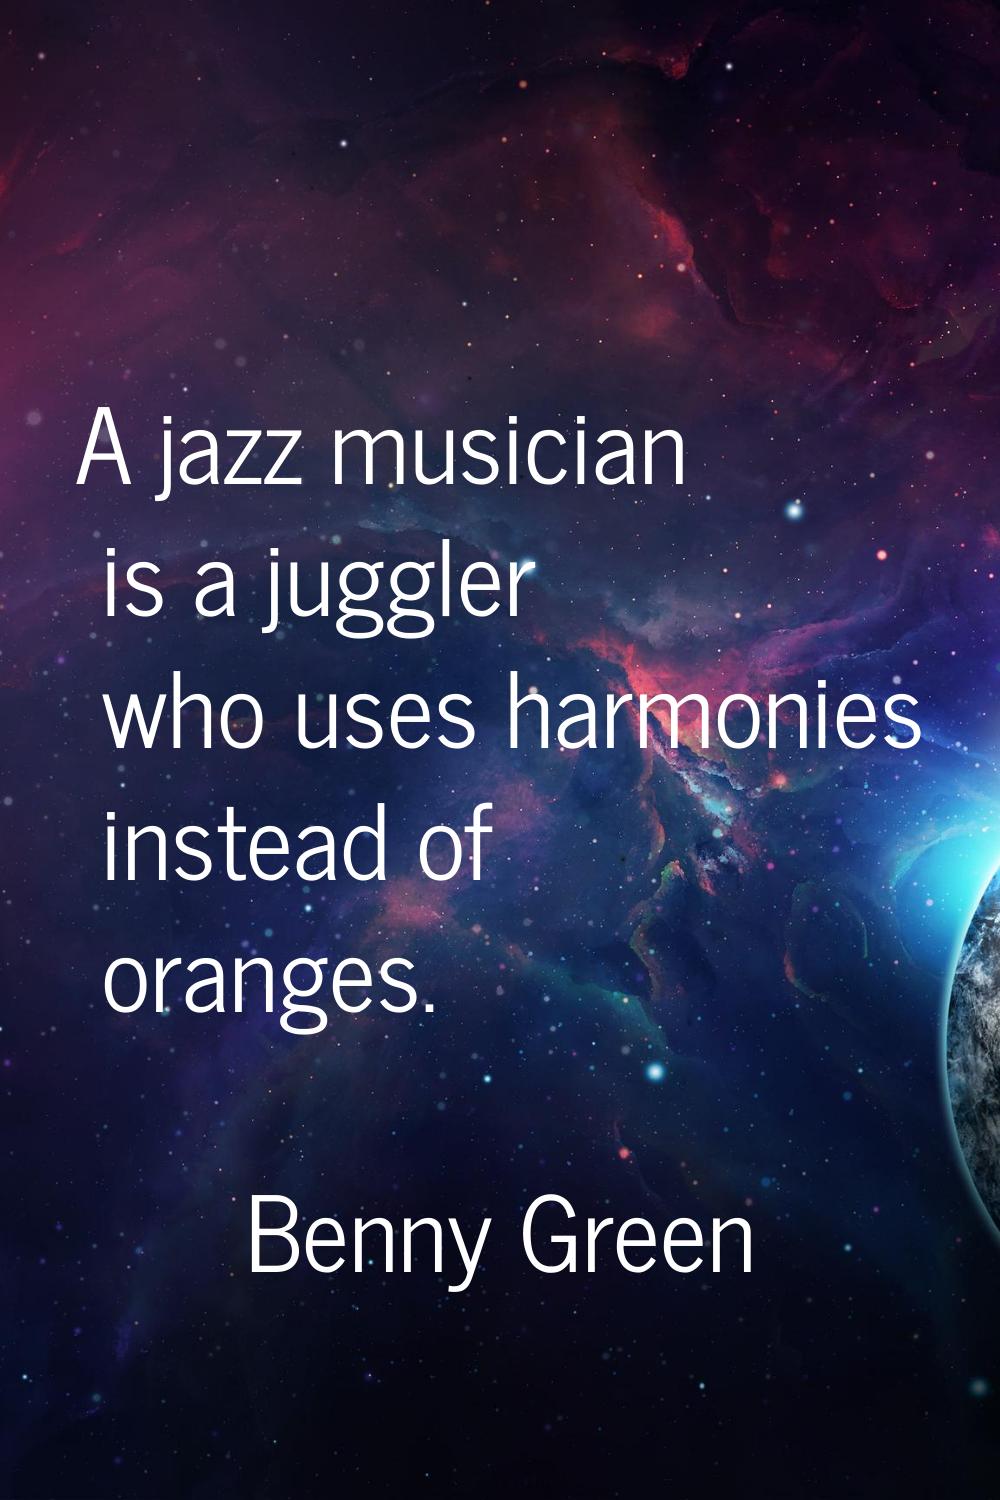 A jazz musician is a juggler who uses harmonies instead of oranges.